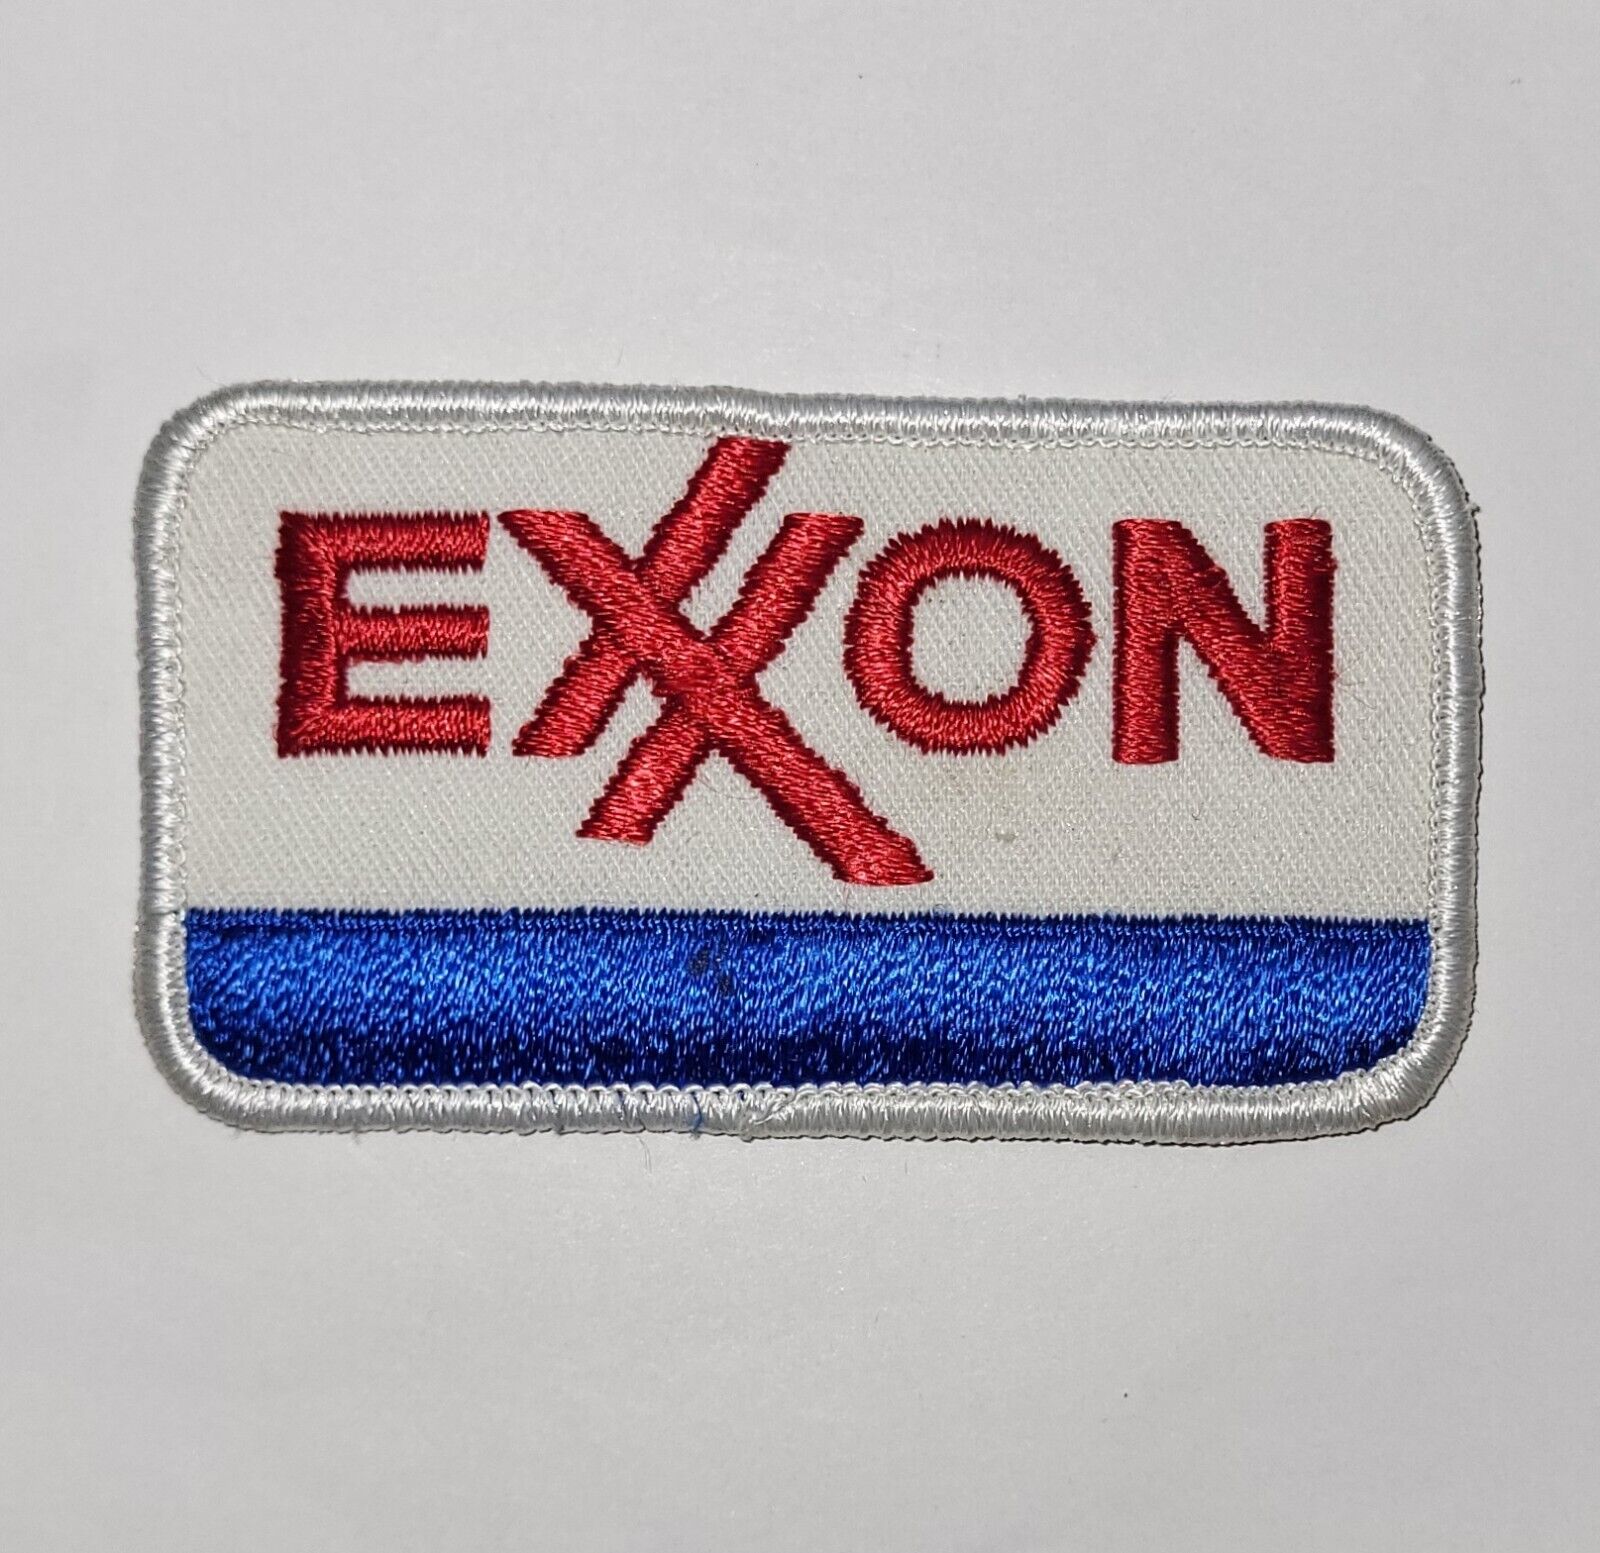 Vintage Exxon Oil Embroidered Patch